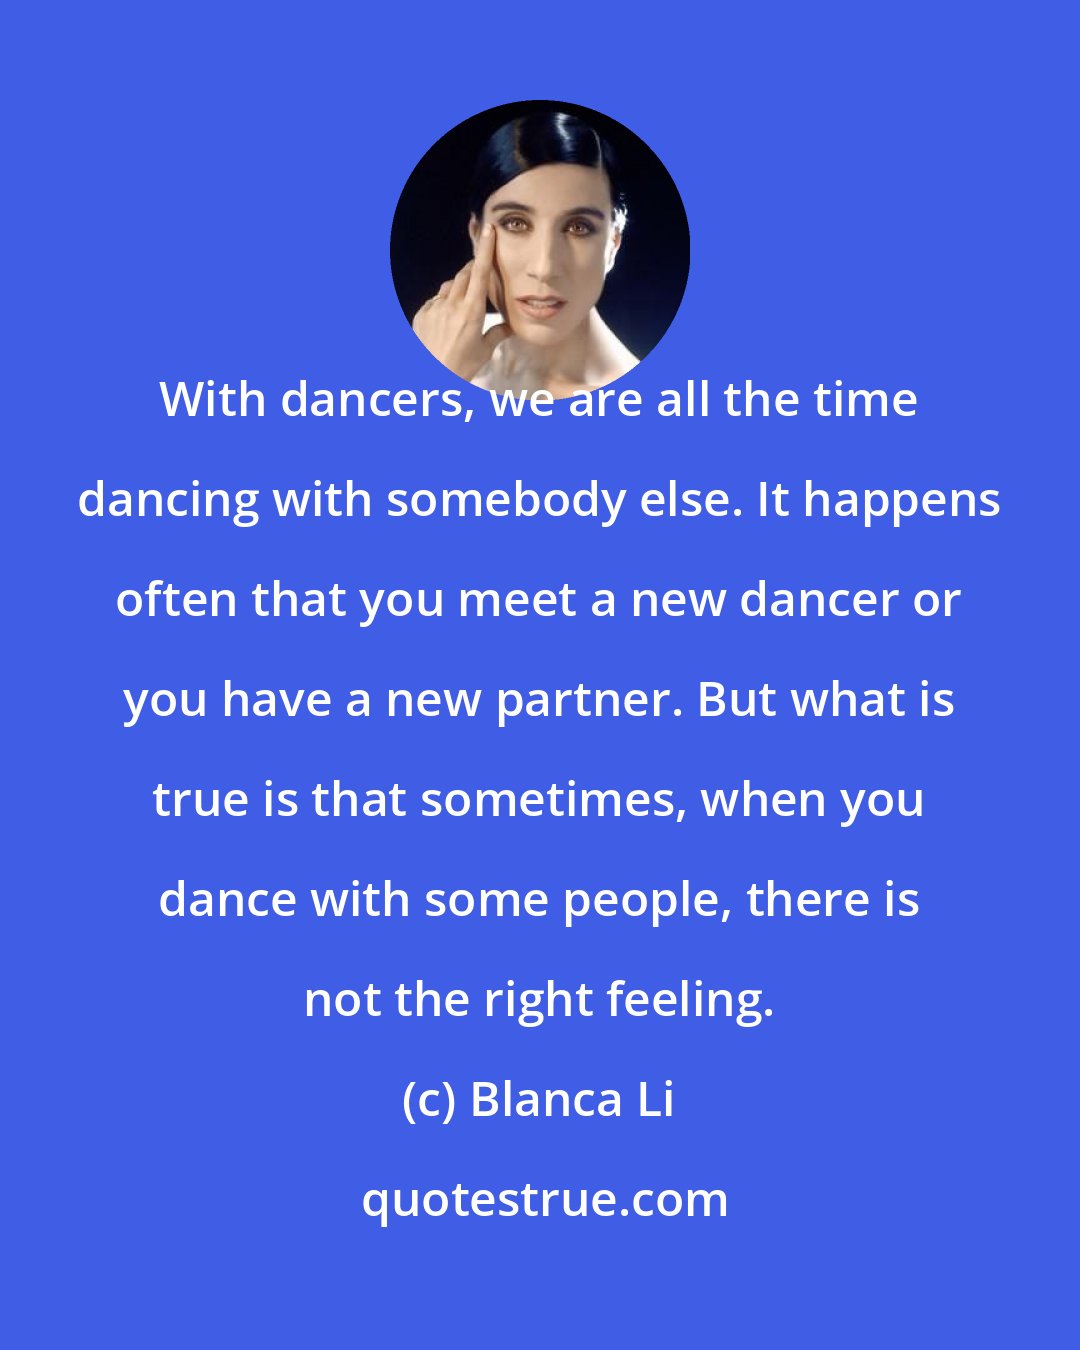 Blanca Li: With dancers, we are all the time dancing with somebody else. It happens often that you meet a new dancer or you have a new partner. But what is true is that sometimes, when you dance with some people, there is not the right feeling.